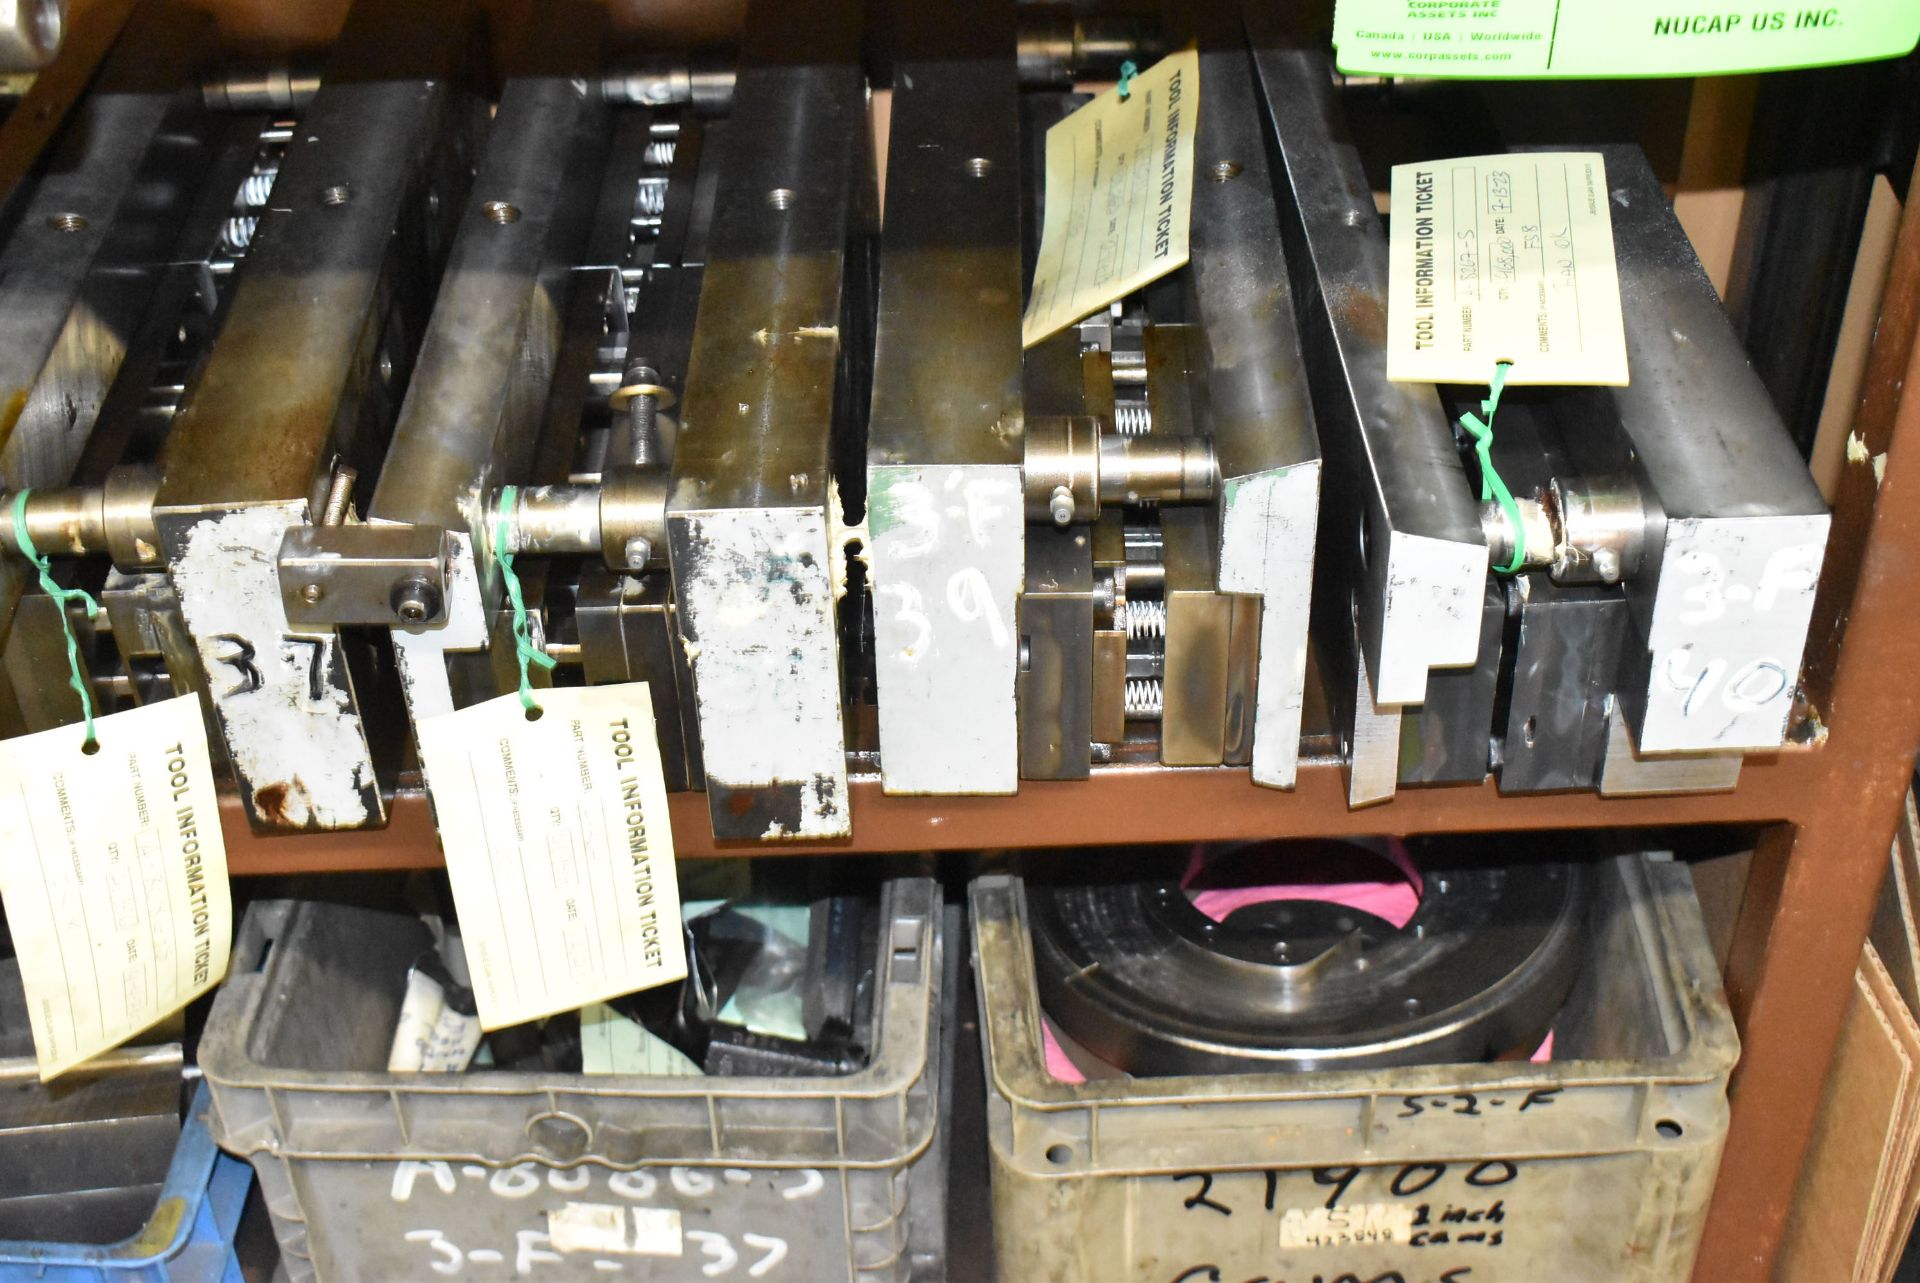 LOT/ CONTENTS OF SHELF - FOUR SLIDE DIE SETS, CUTTER HEADS & TOOLING - Image 2 of 5